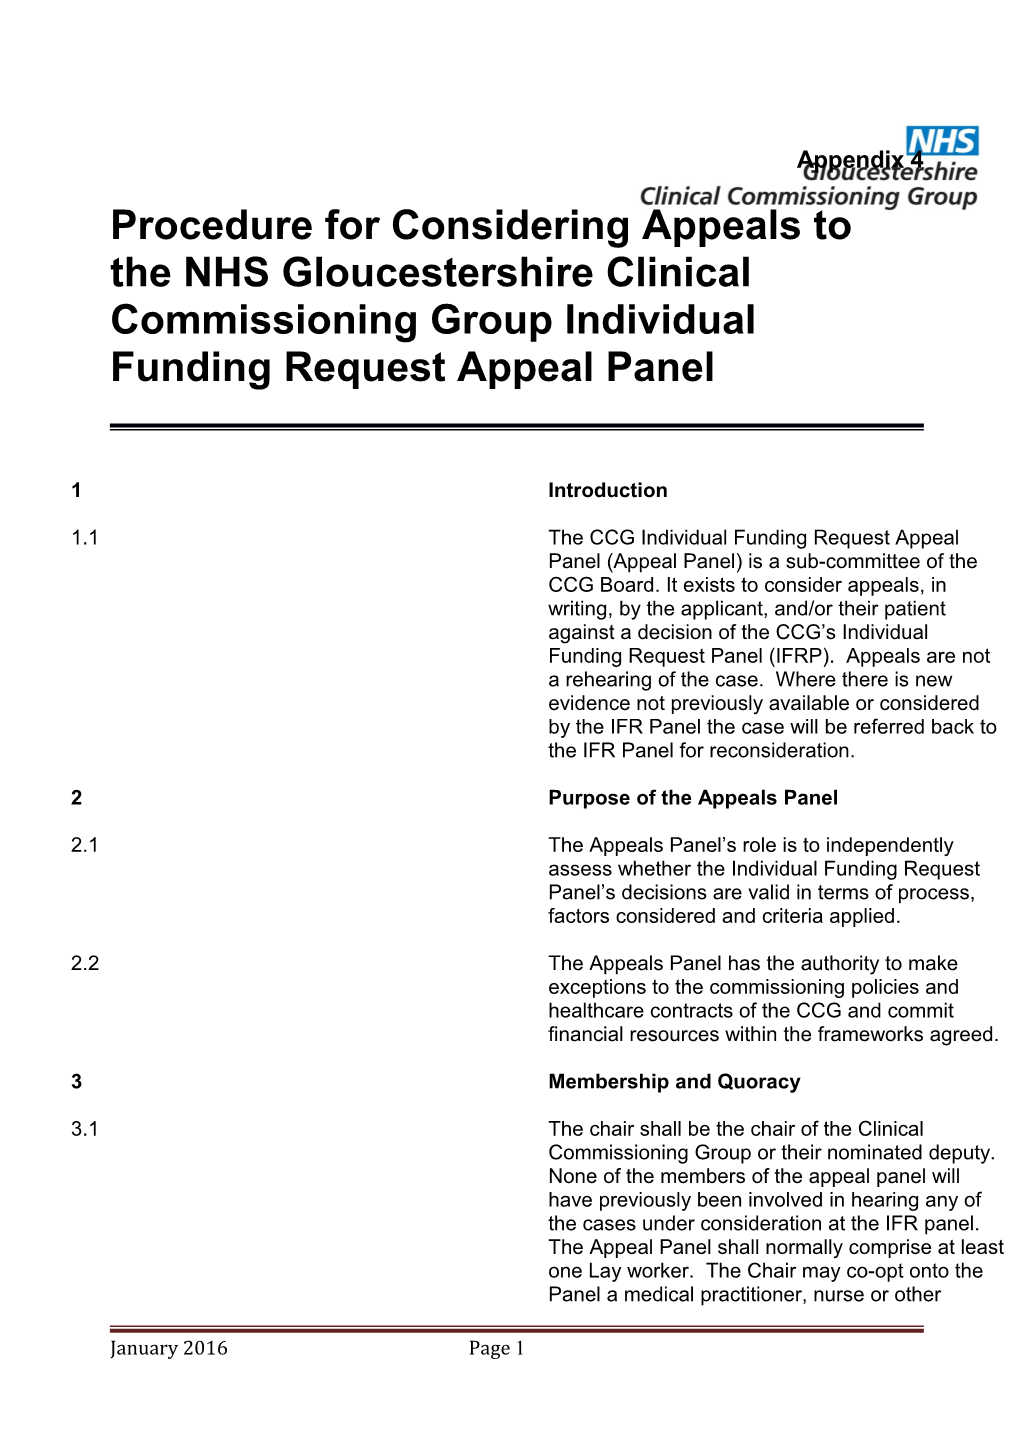 Procedure for Considering Appeals to the NHS Gloucestershire Clinical Commissioning Group